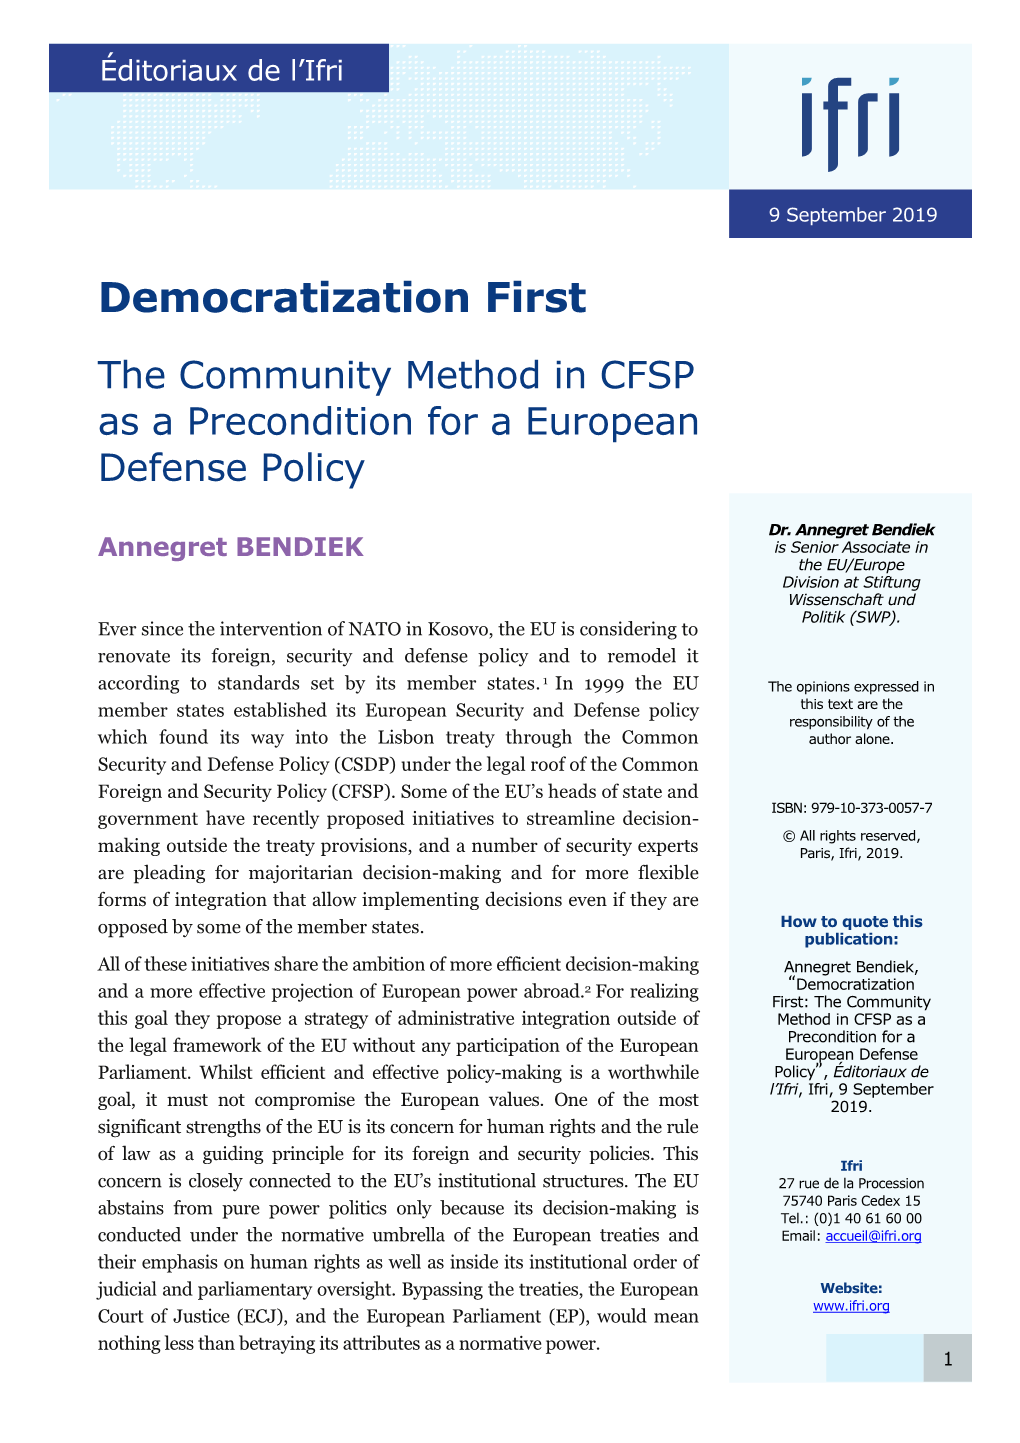 Democratization First: the Community Method in CFSP As a Precondition